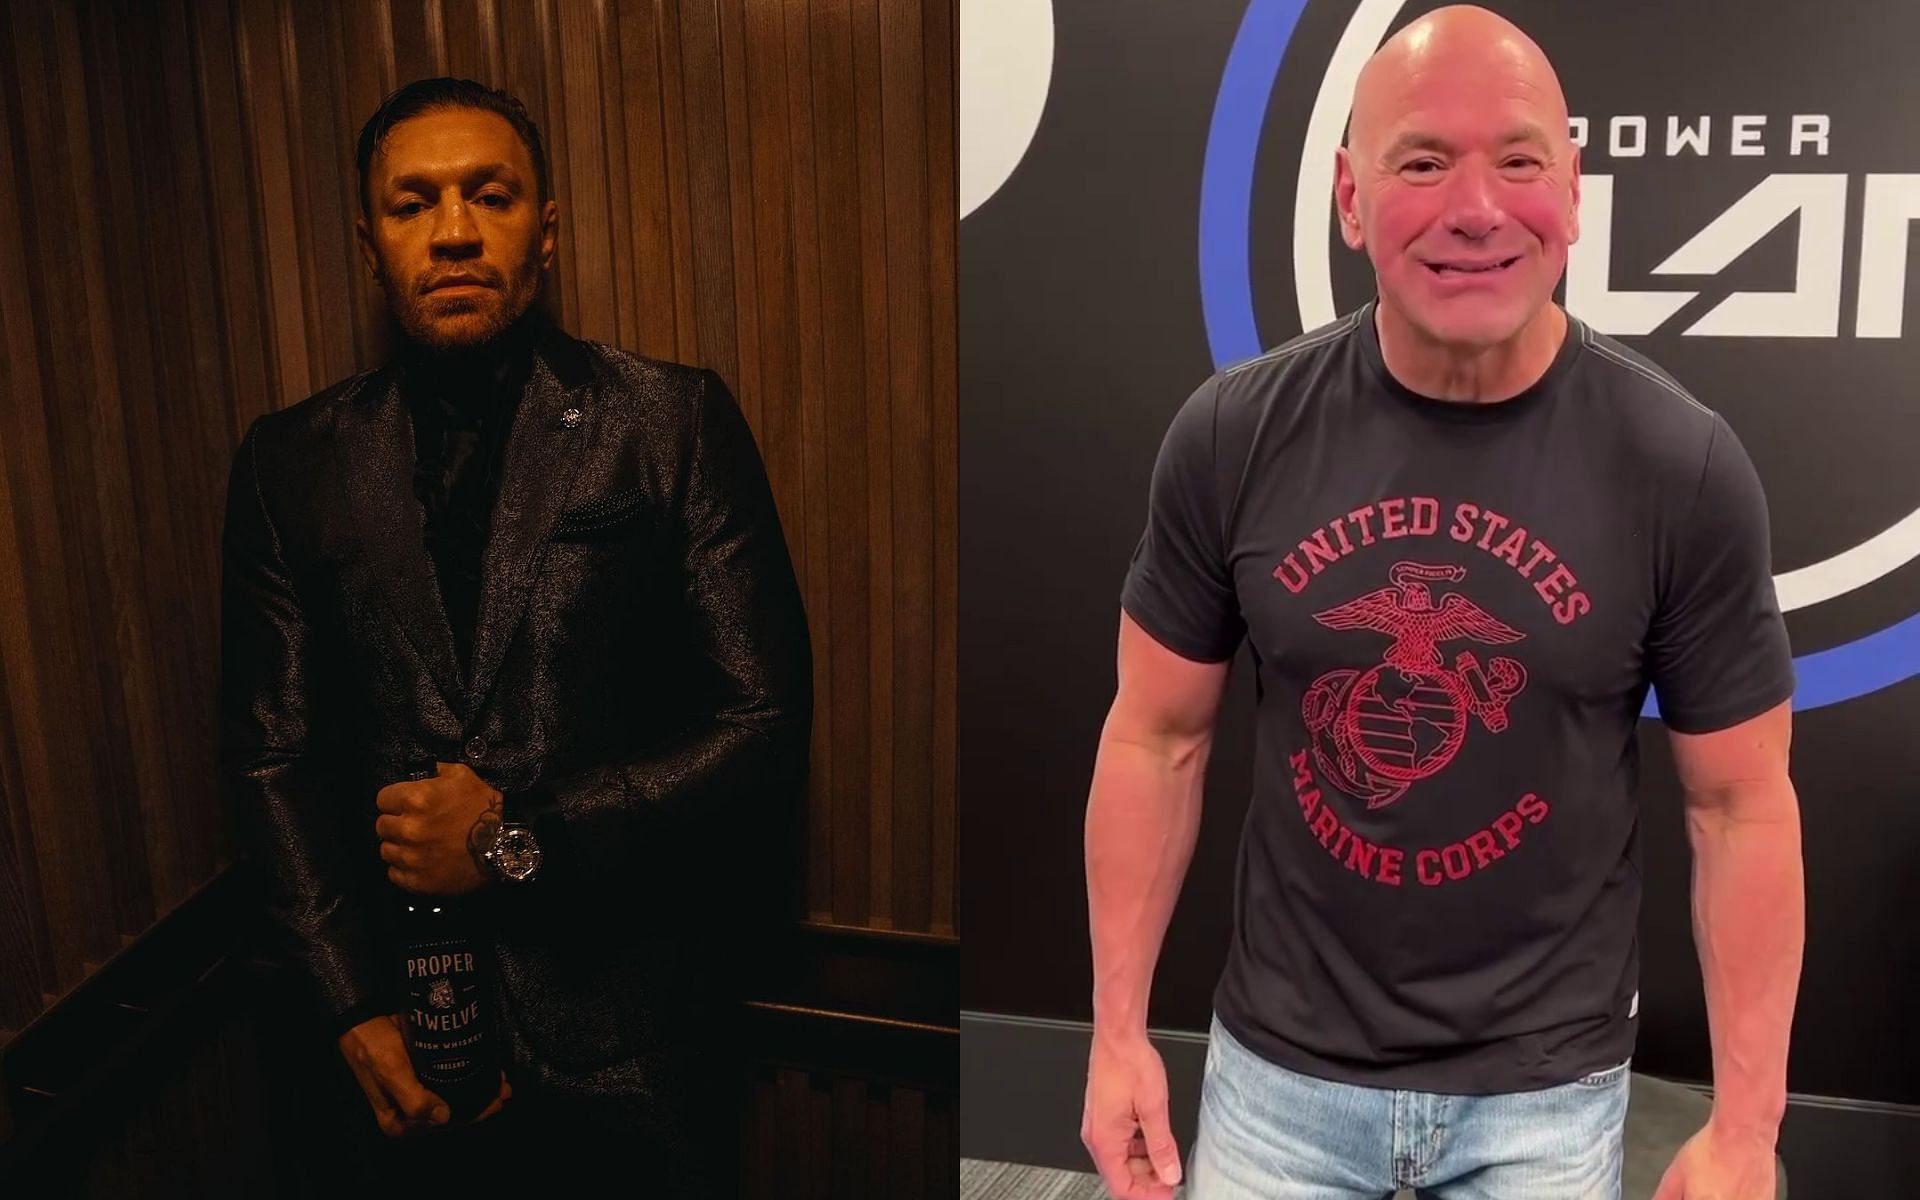 According to David Feldman, Dana White (right) may be unhappy because Conor McGregor (left) co-owns BKFC [Images courtesy: @thenotoriousmma and @ danawhite on Instagram]